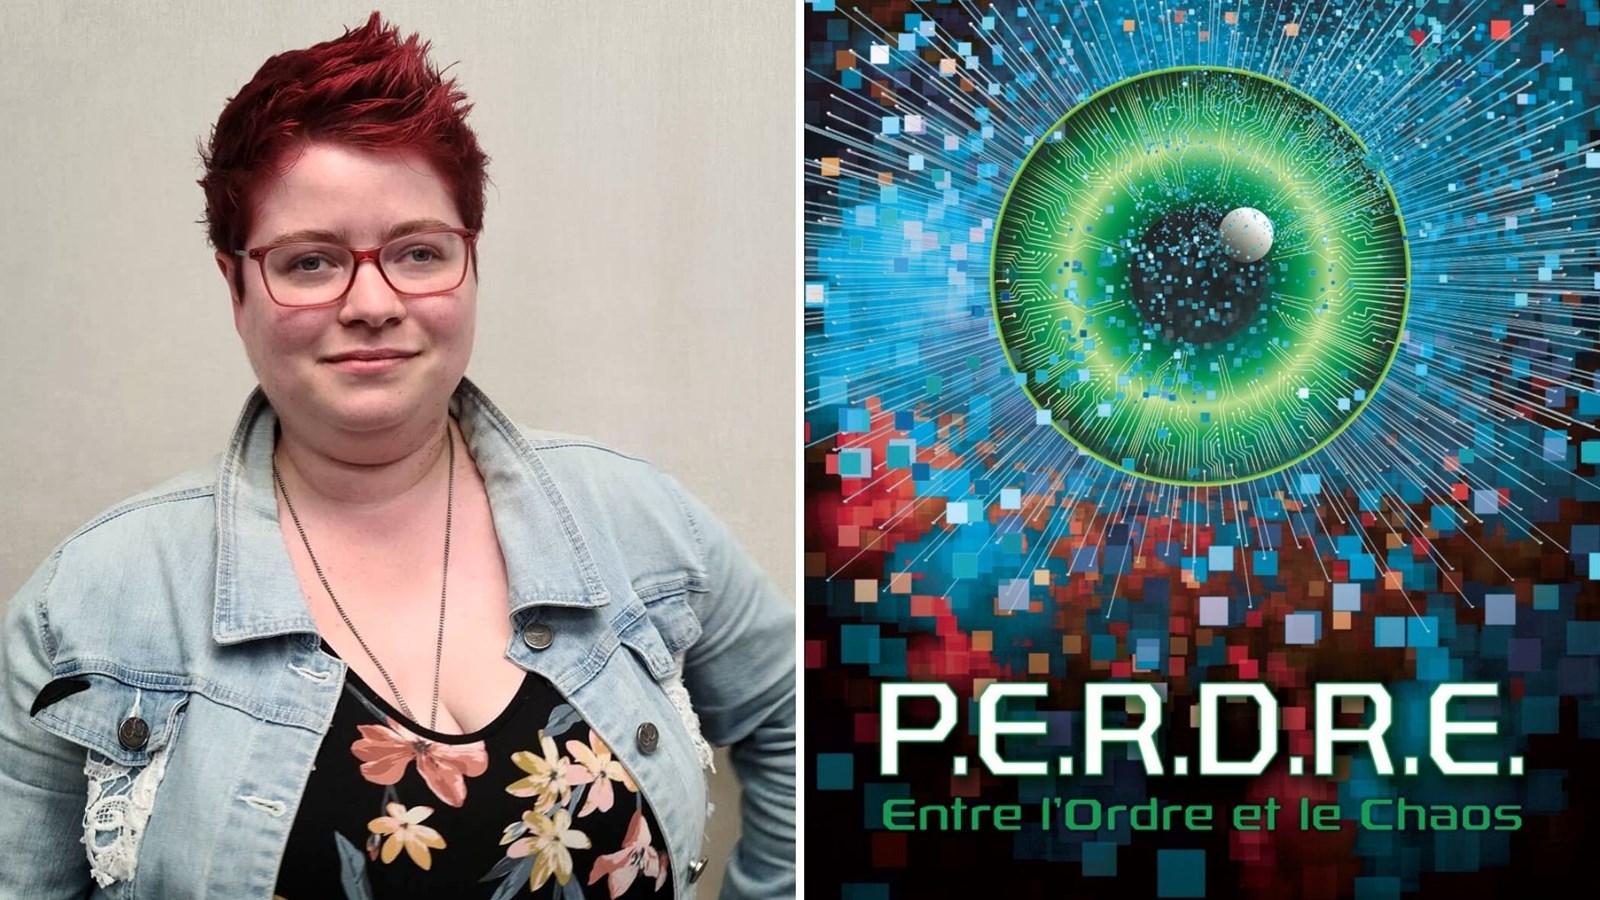 Amelie Carrier has released the first volume of her science fiction novel